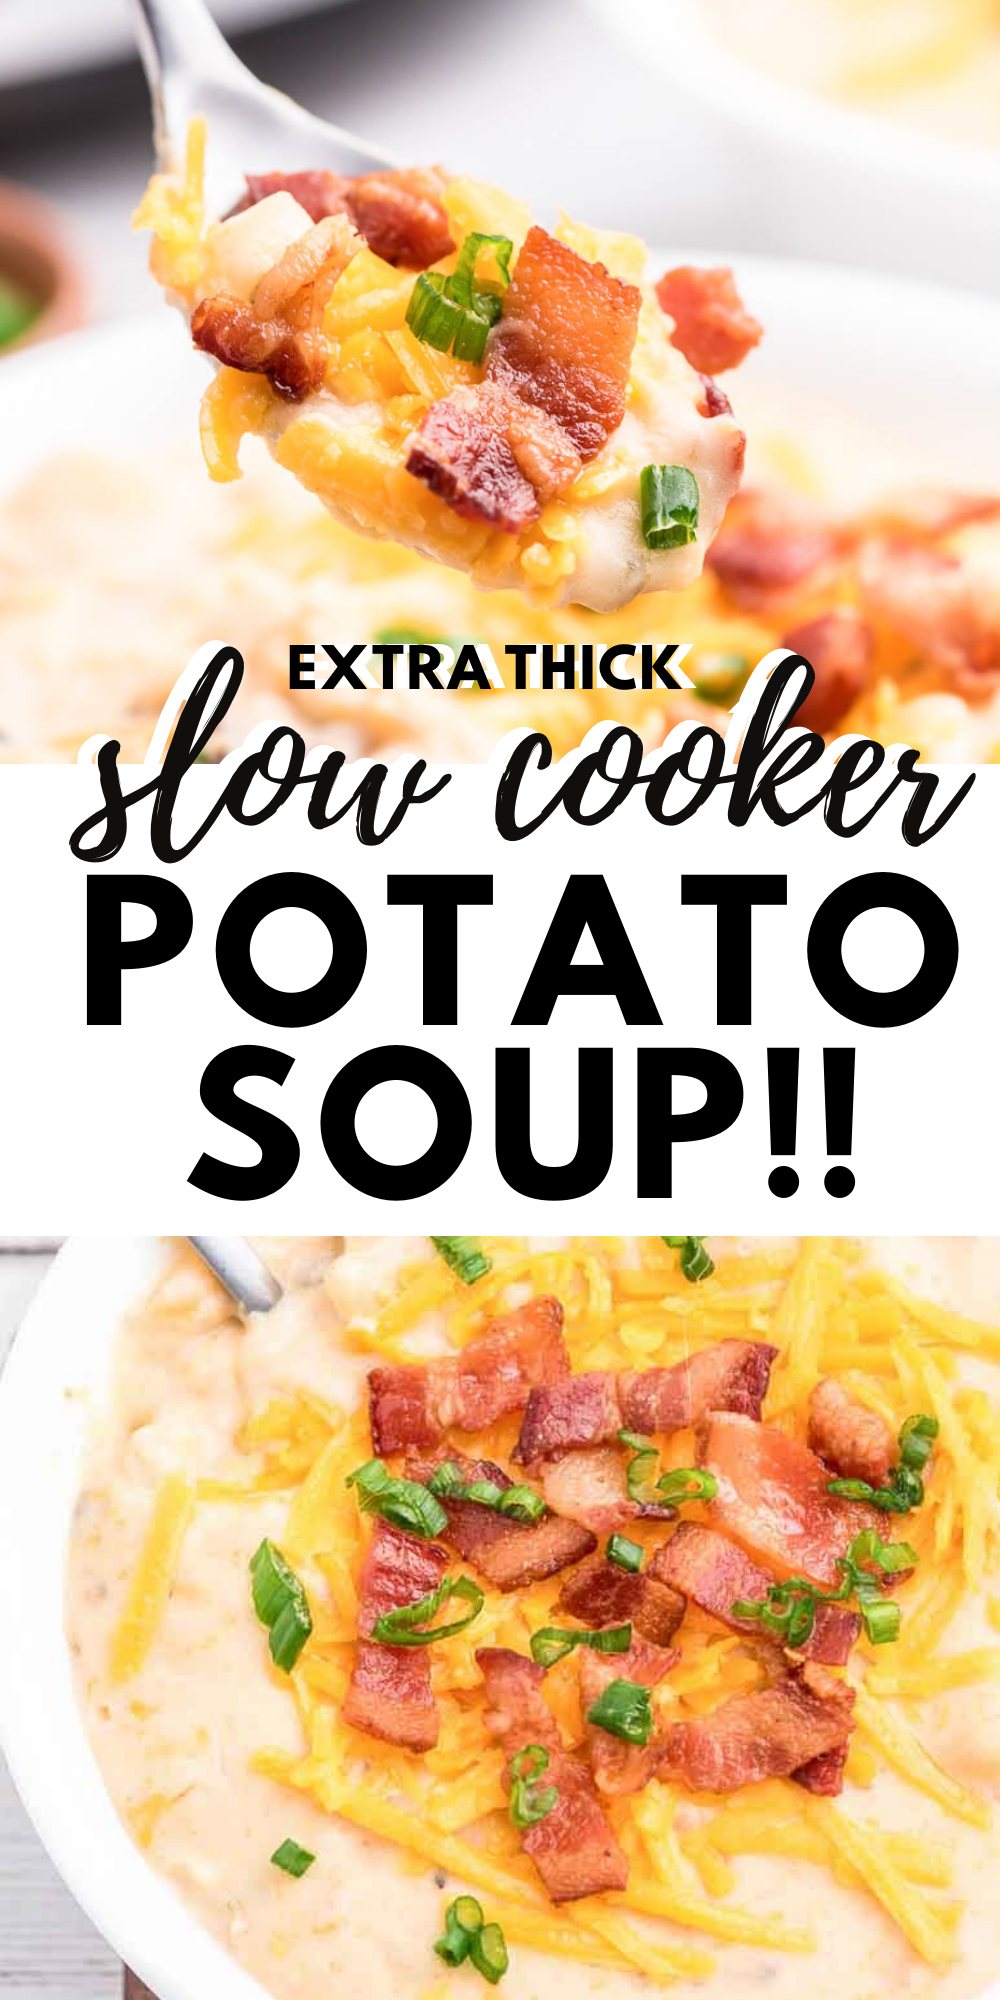 Slow Cooker Baked Potato Soup recipe that is made extra thick. Top with chopped bacon, sliced green onions and shredded cheddar cheese.